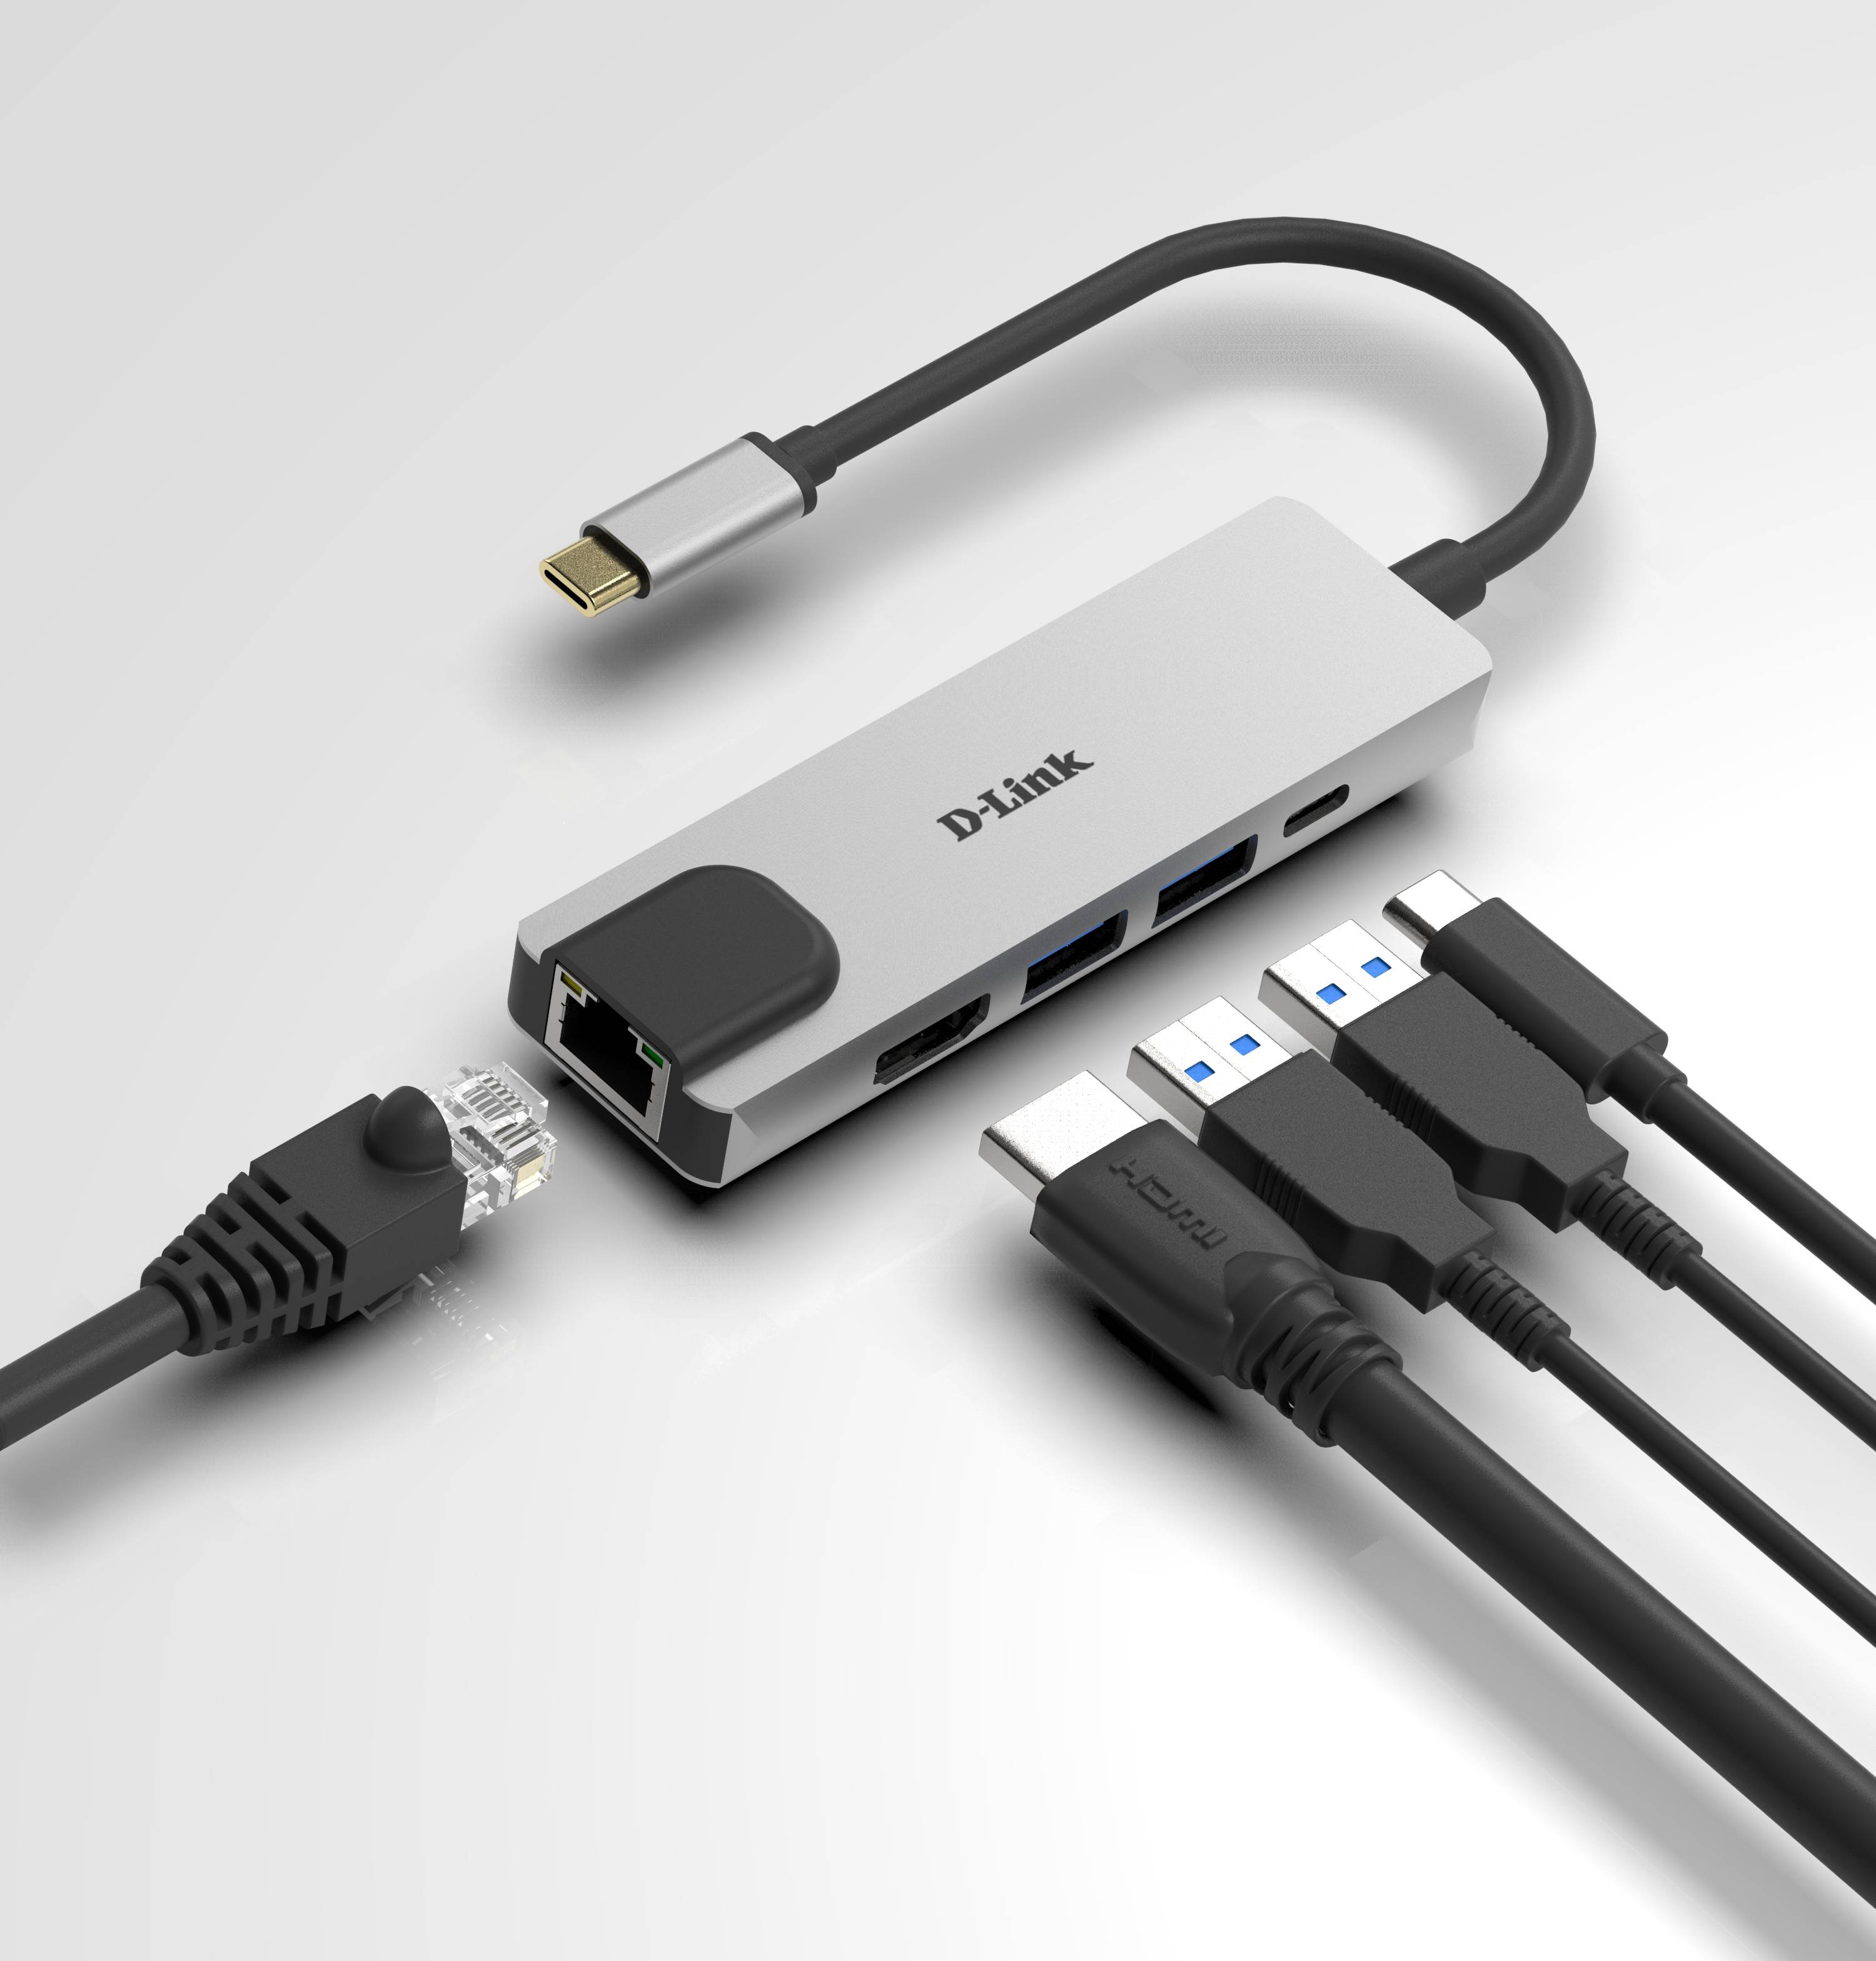 Rca Informatique - image du produit : 5-IN-1 USB-C HUB WITH HDMI ETHERNET AND POWER DELIVERY